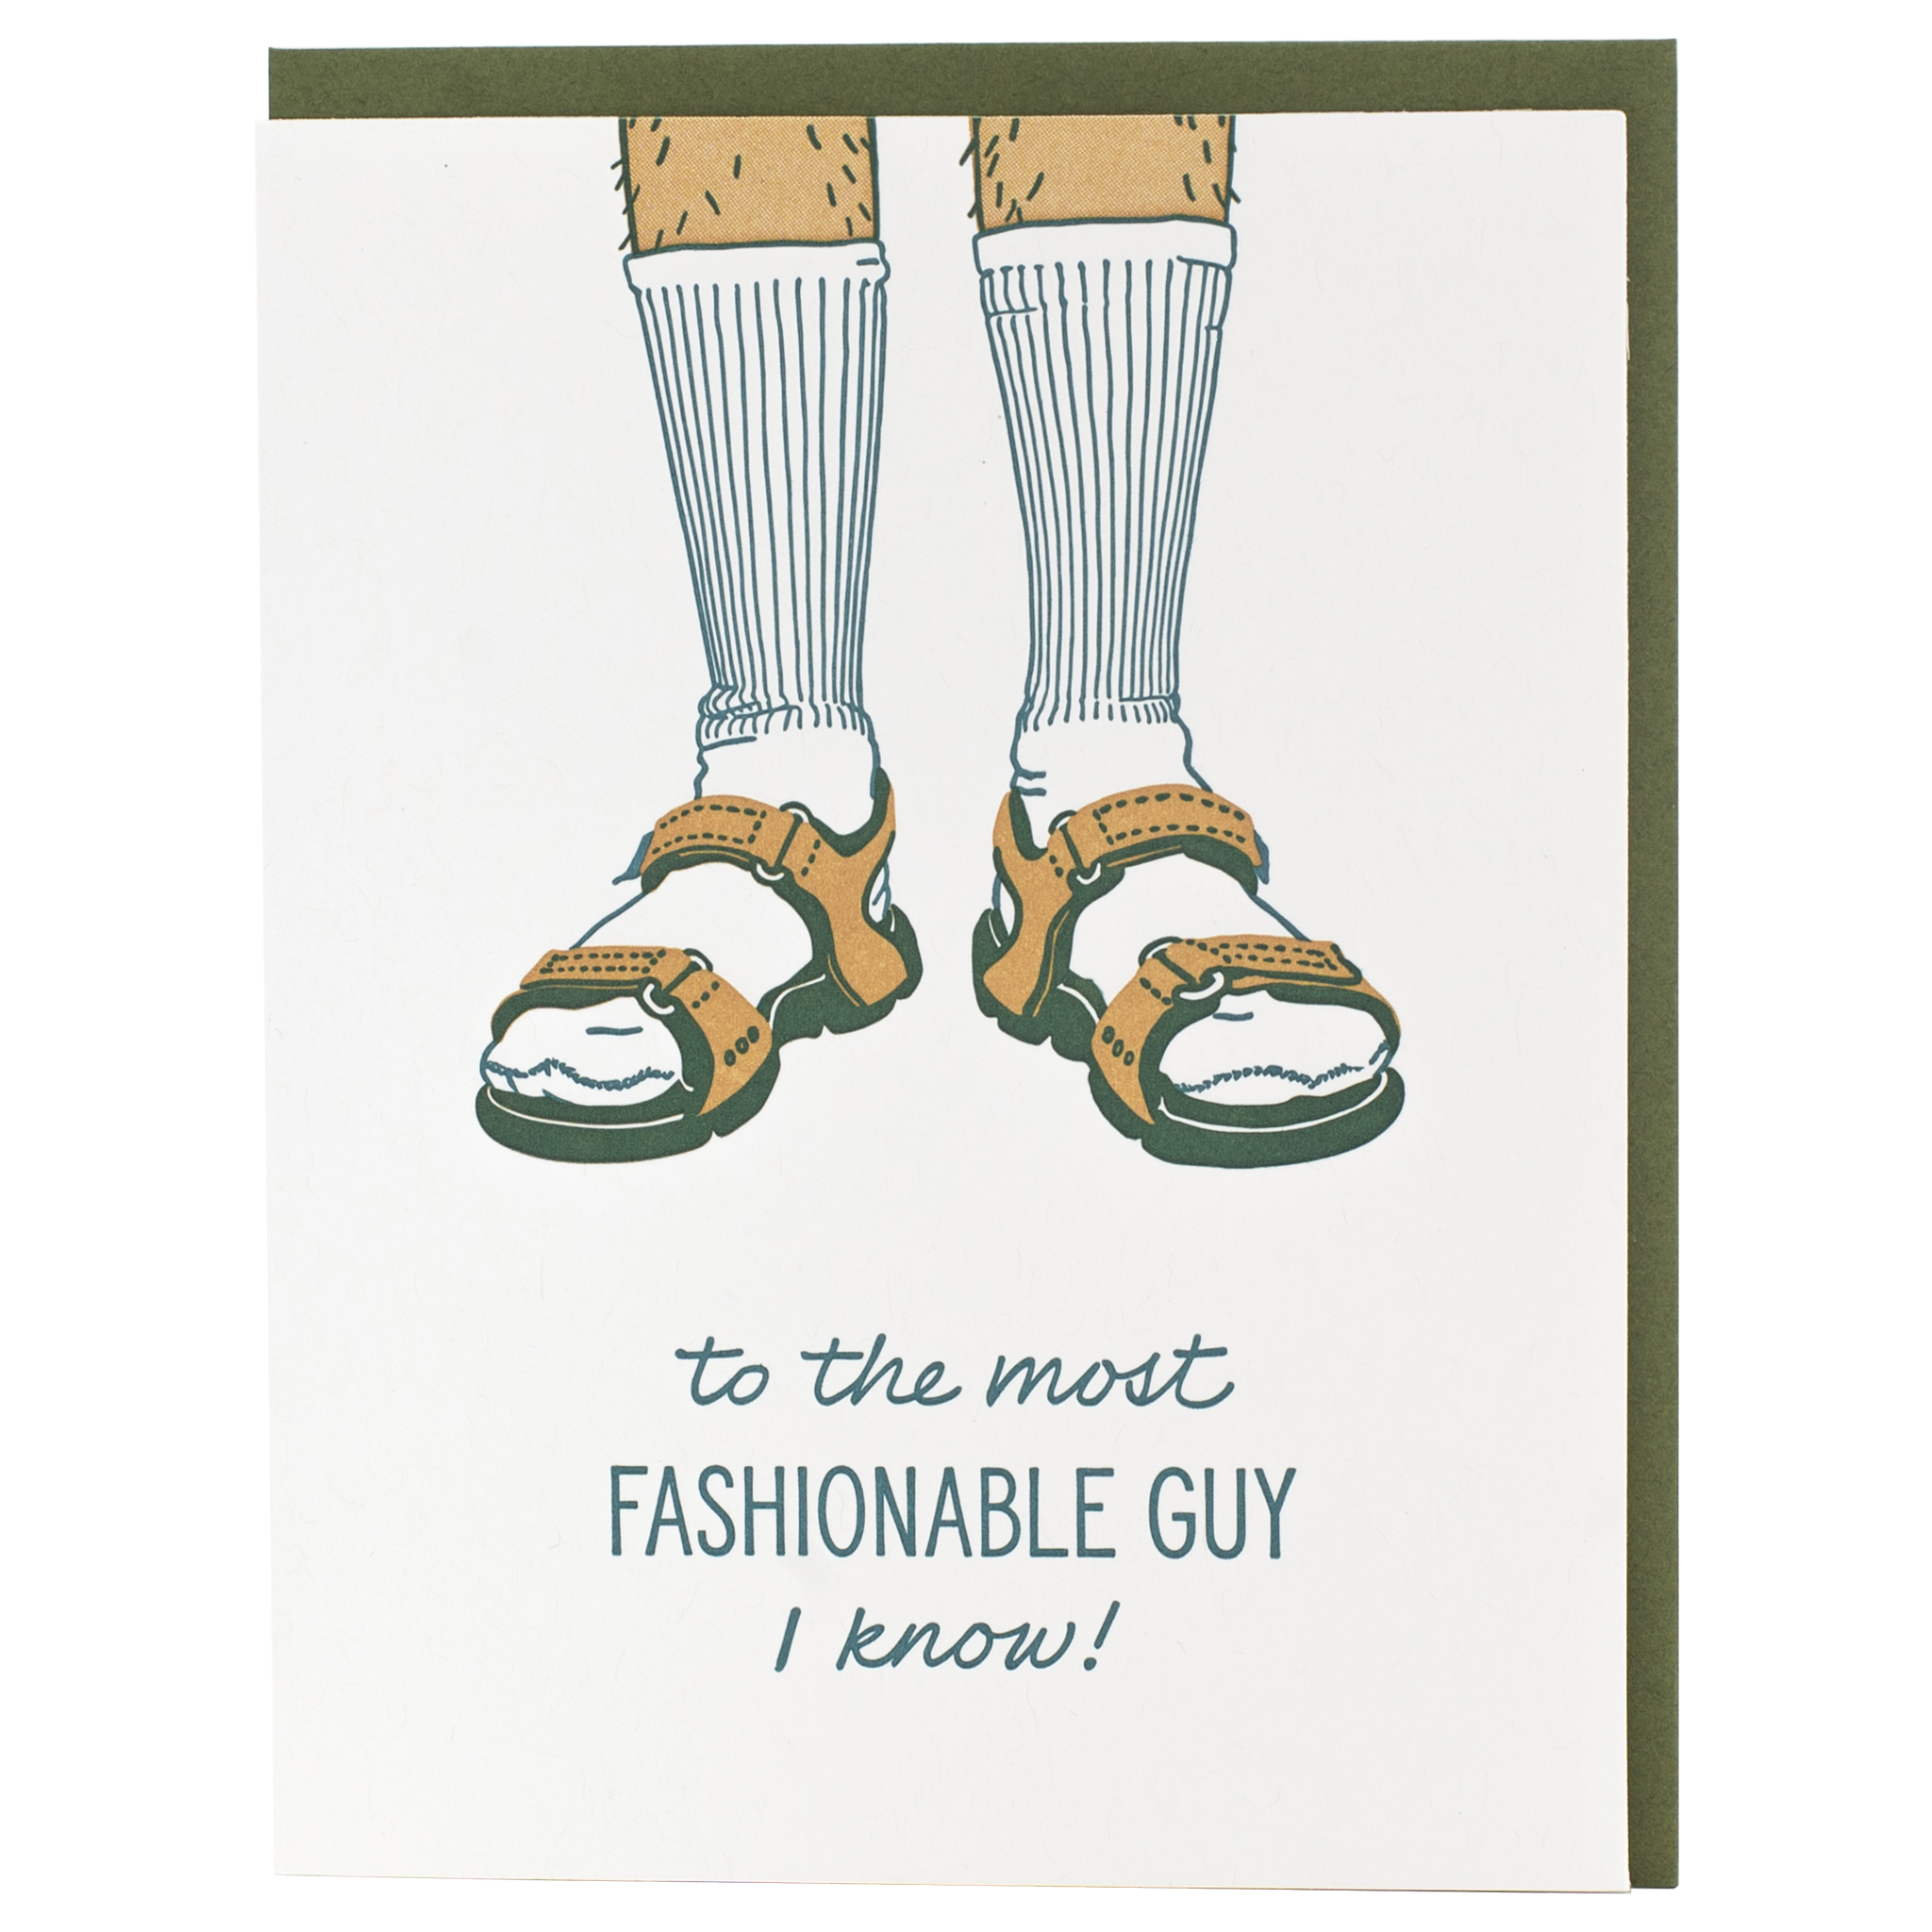 Socks & Sandals Father's Day Card